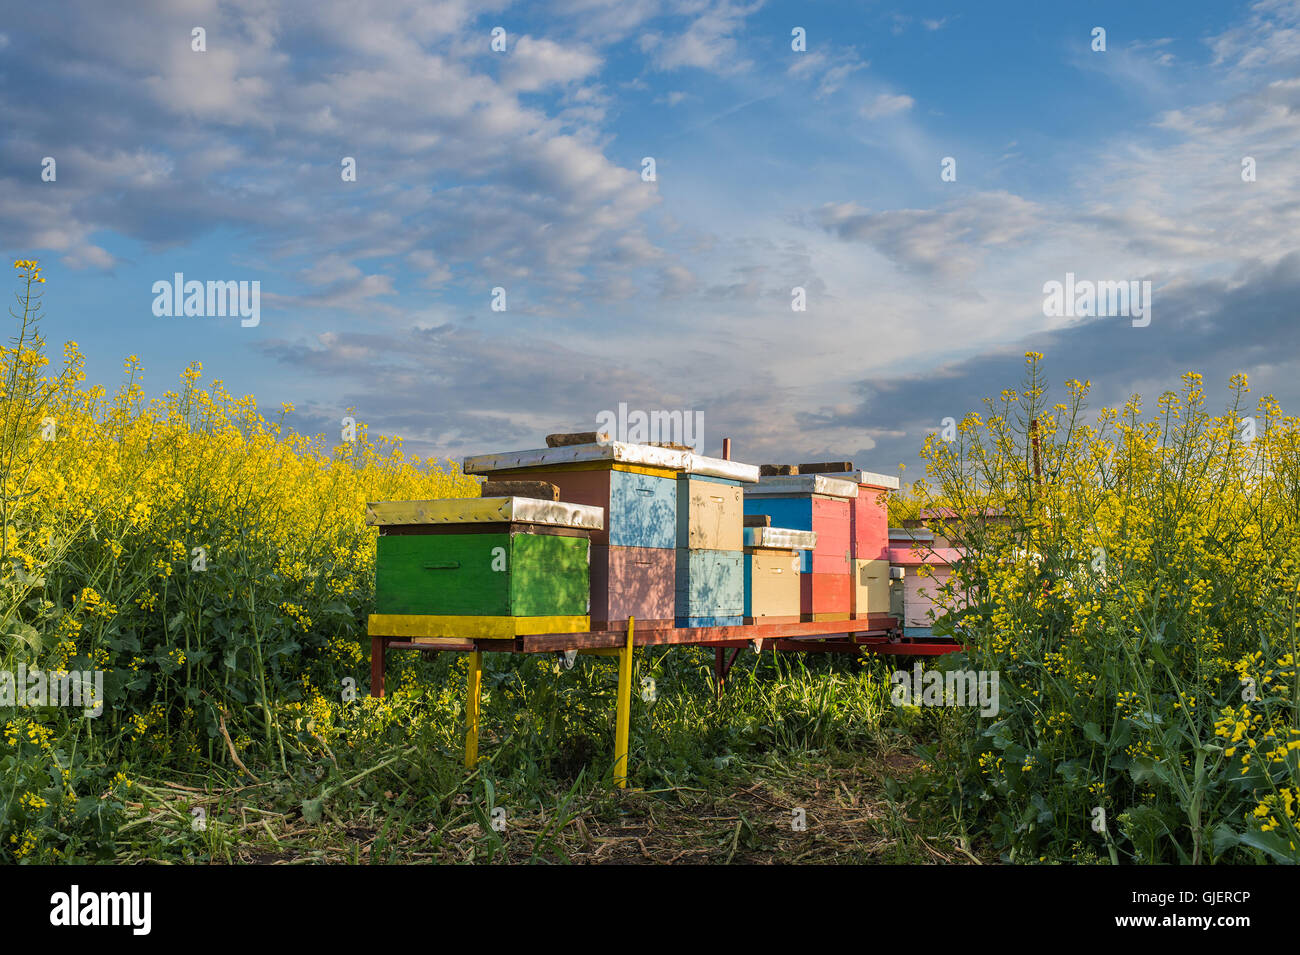 Apiary in the field of rapeseed Stock Photo